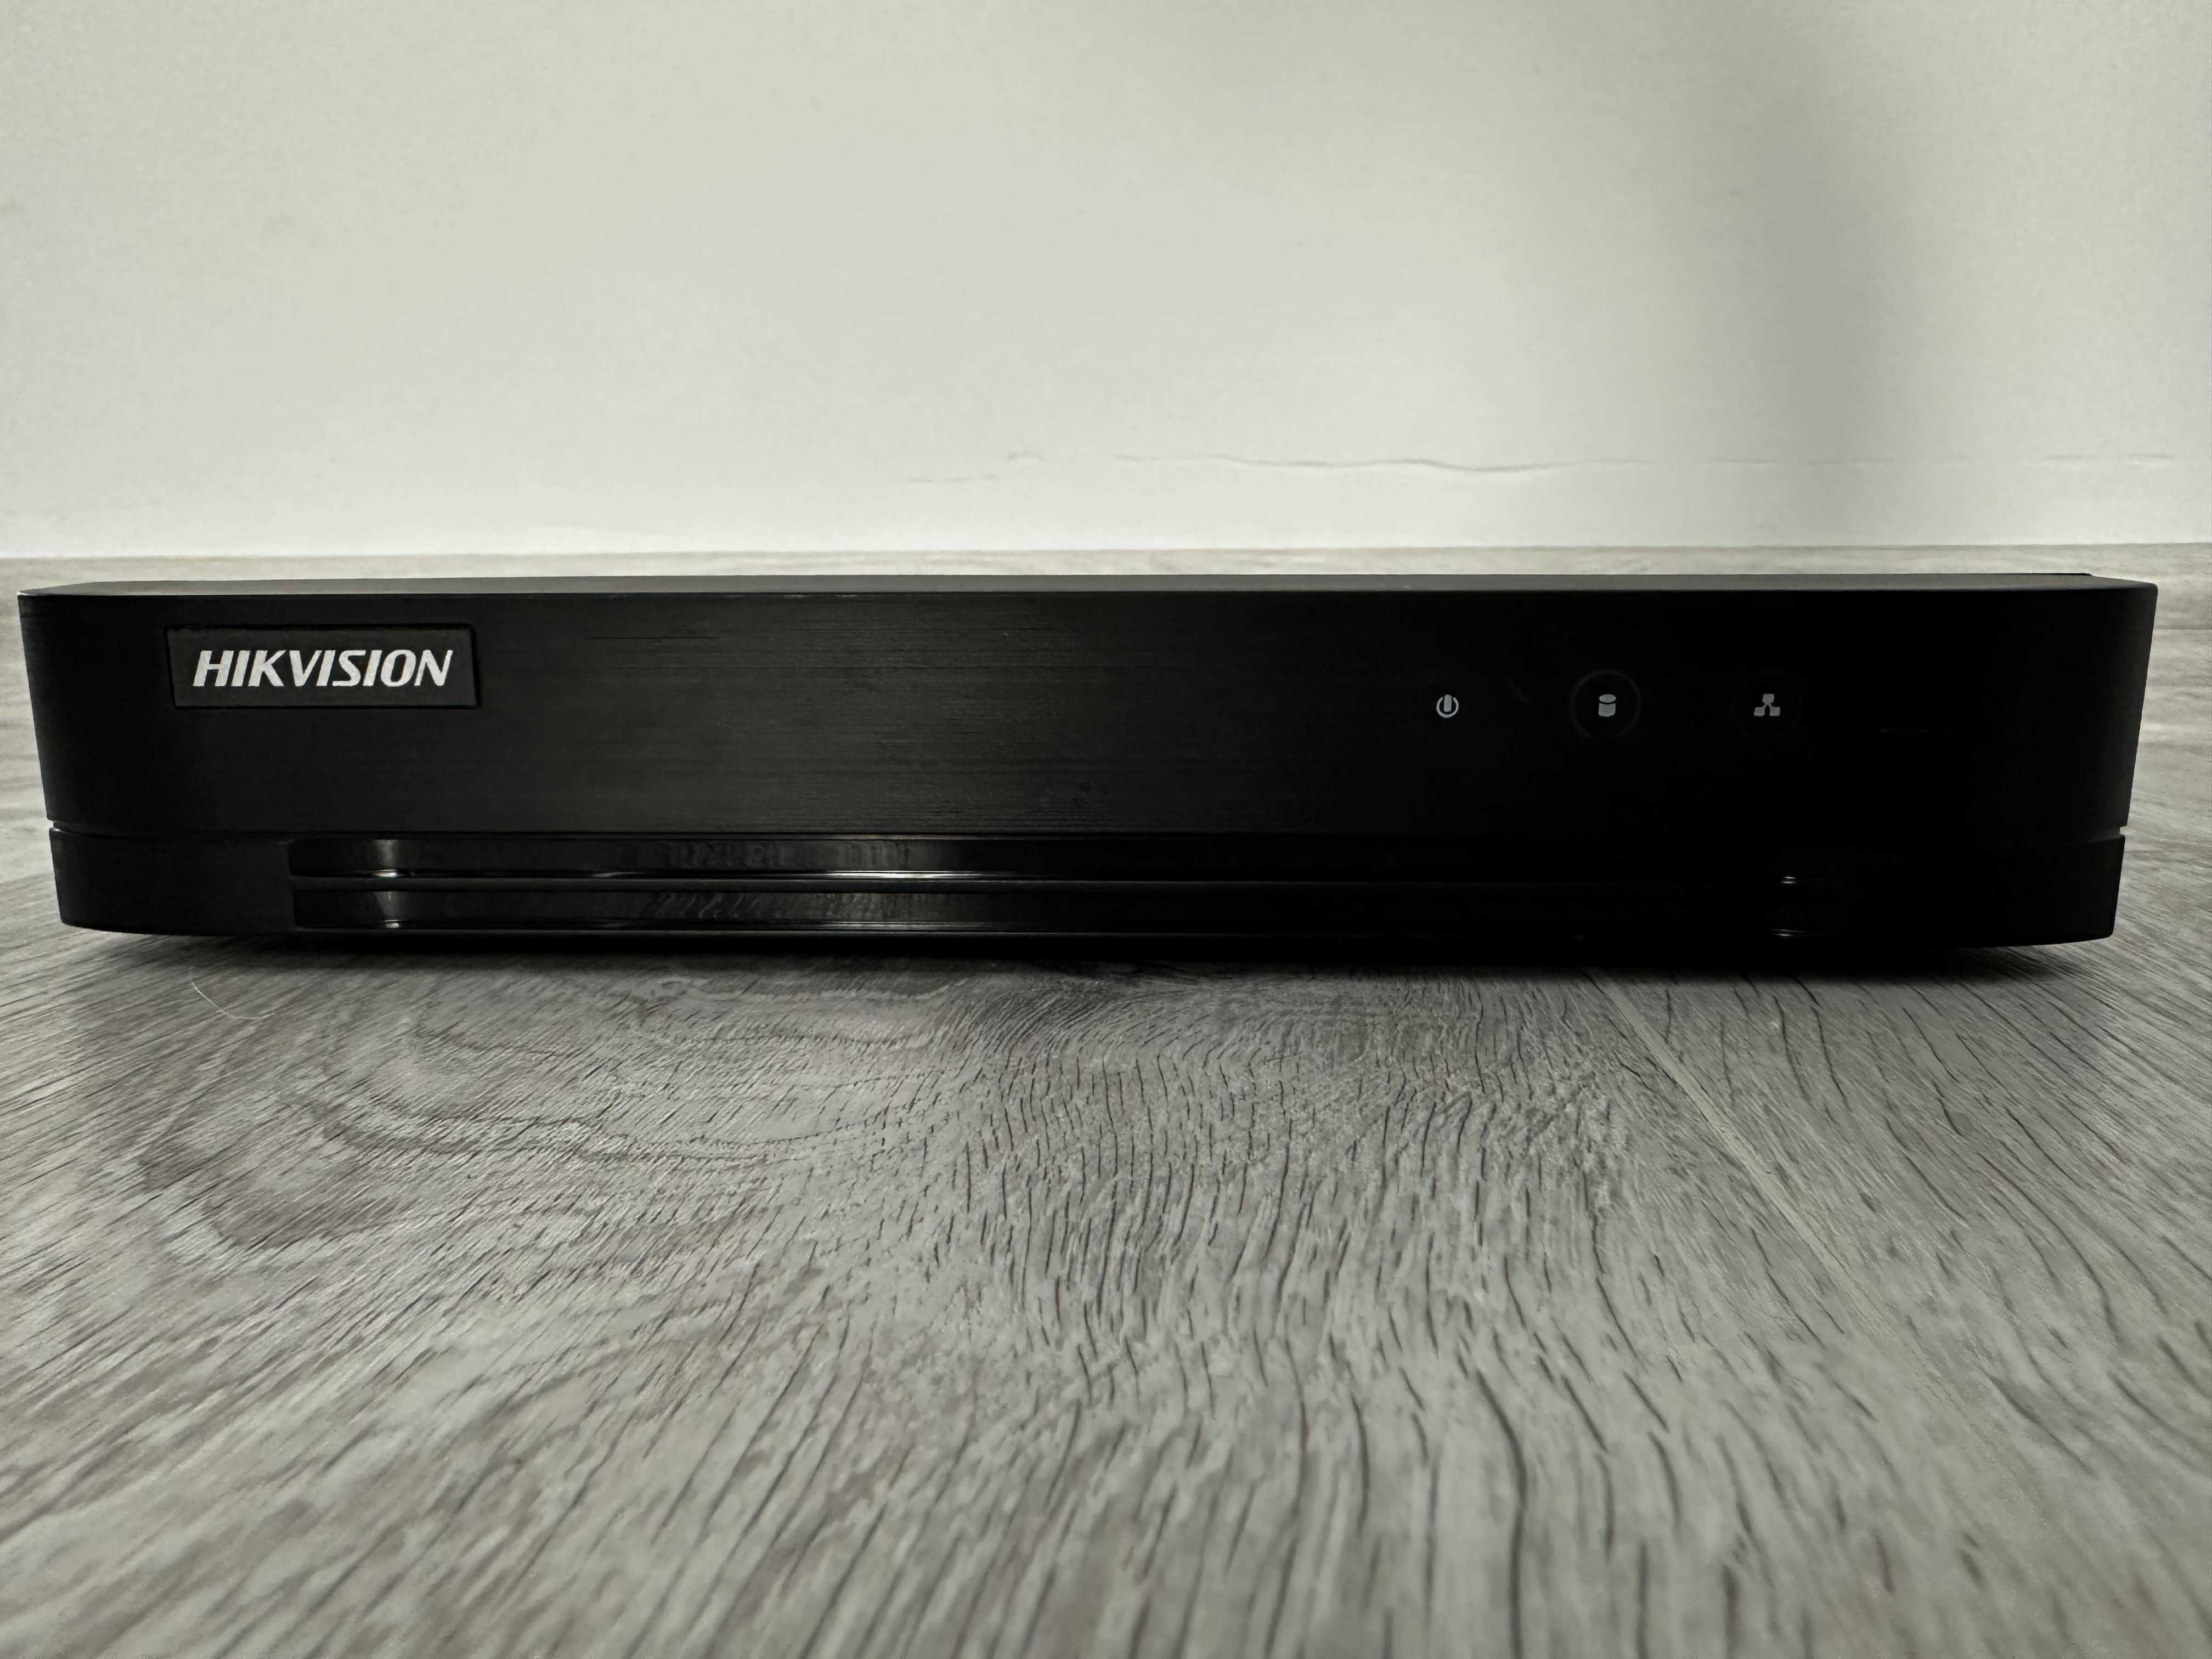 DVR HikVision Turbo HD DS-7204HUHI-K1/E, 4 canale, 8 MP, + HDD 500 GB